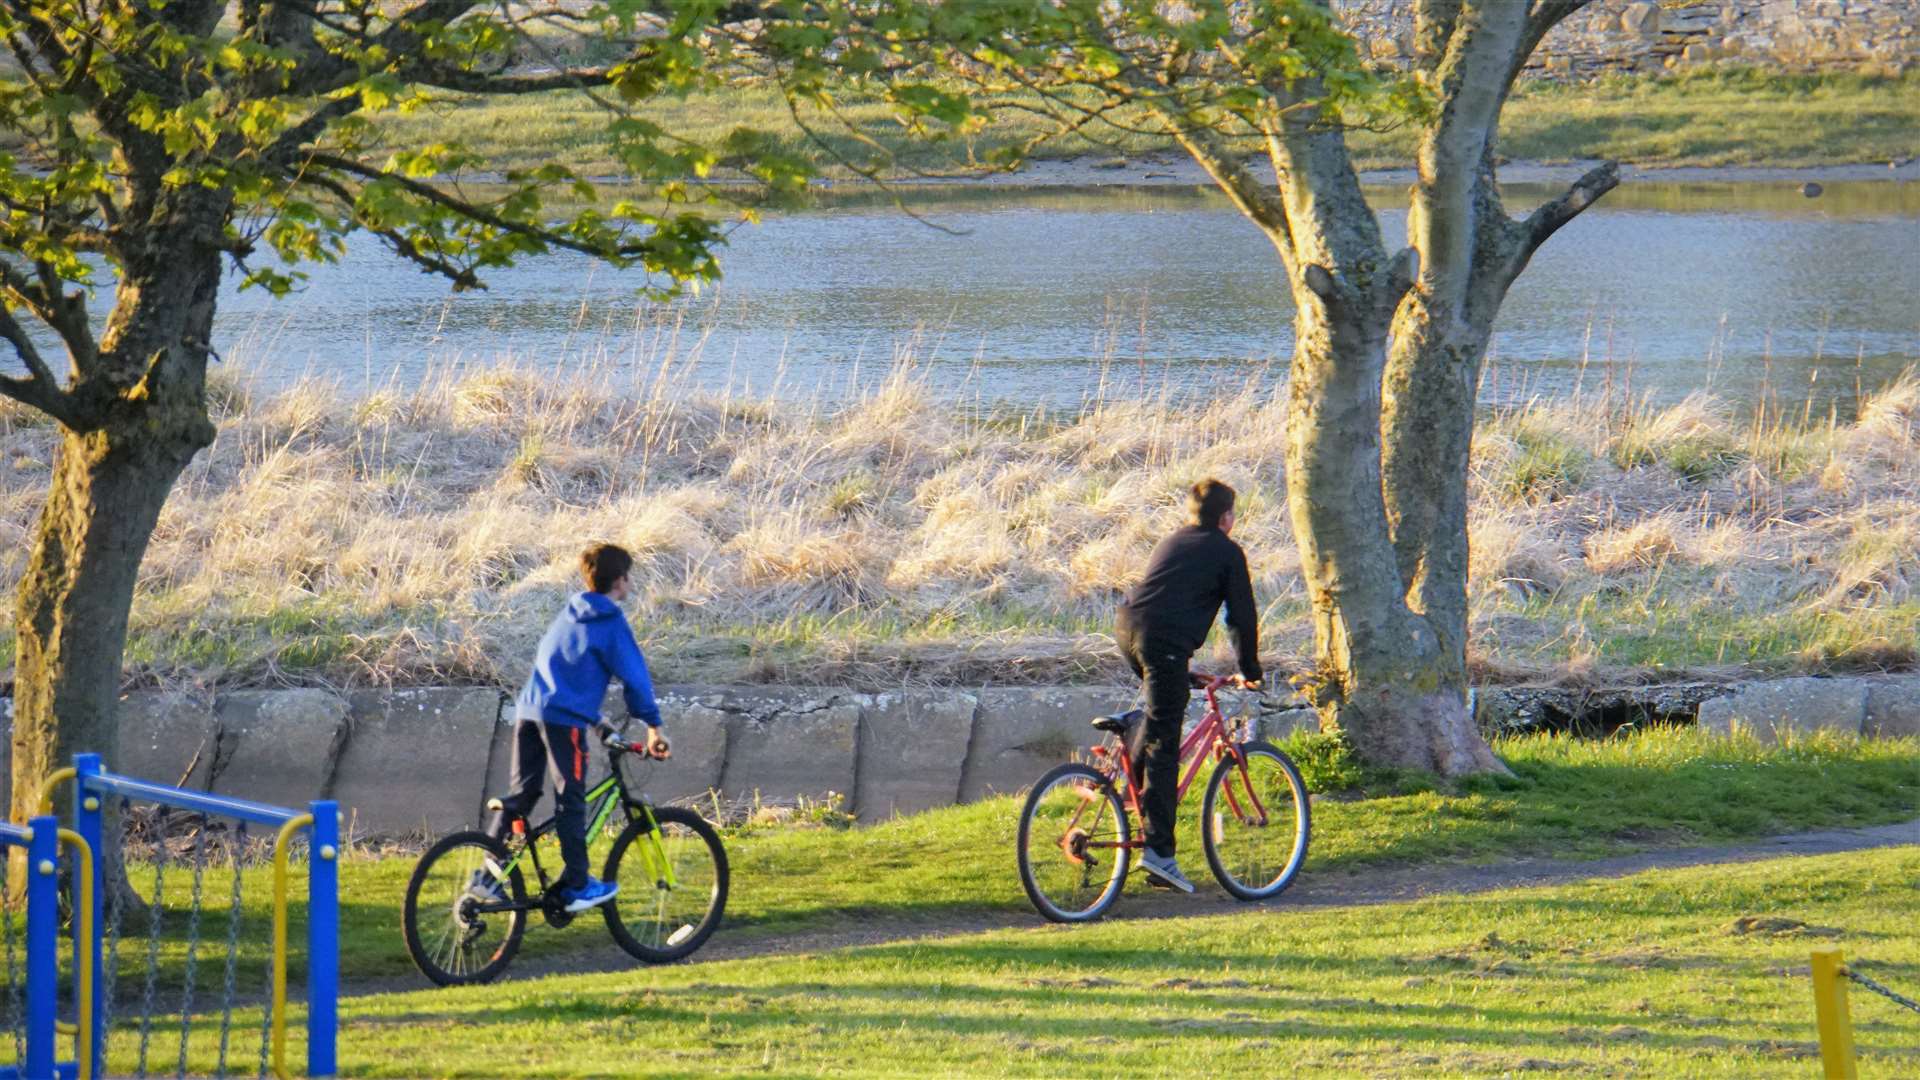 The council intends to develop cycle and walking paths in Wick as a response to the coronavirus crisis. Picture: DGS